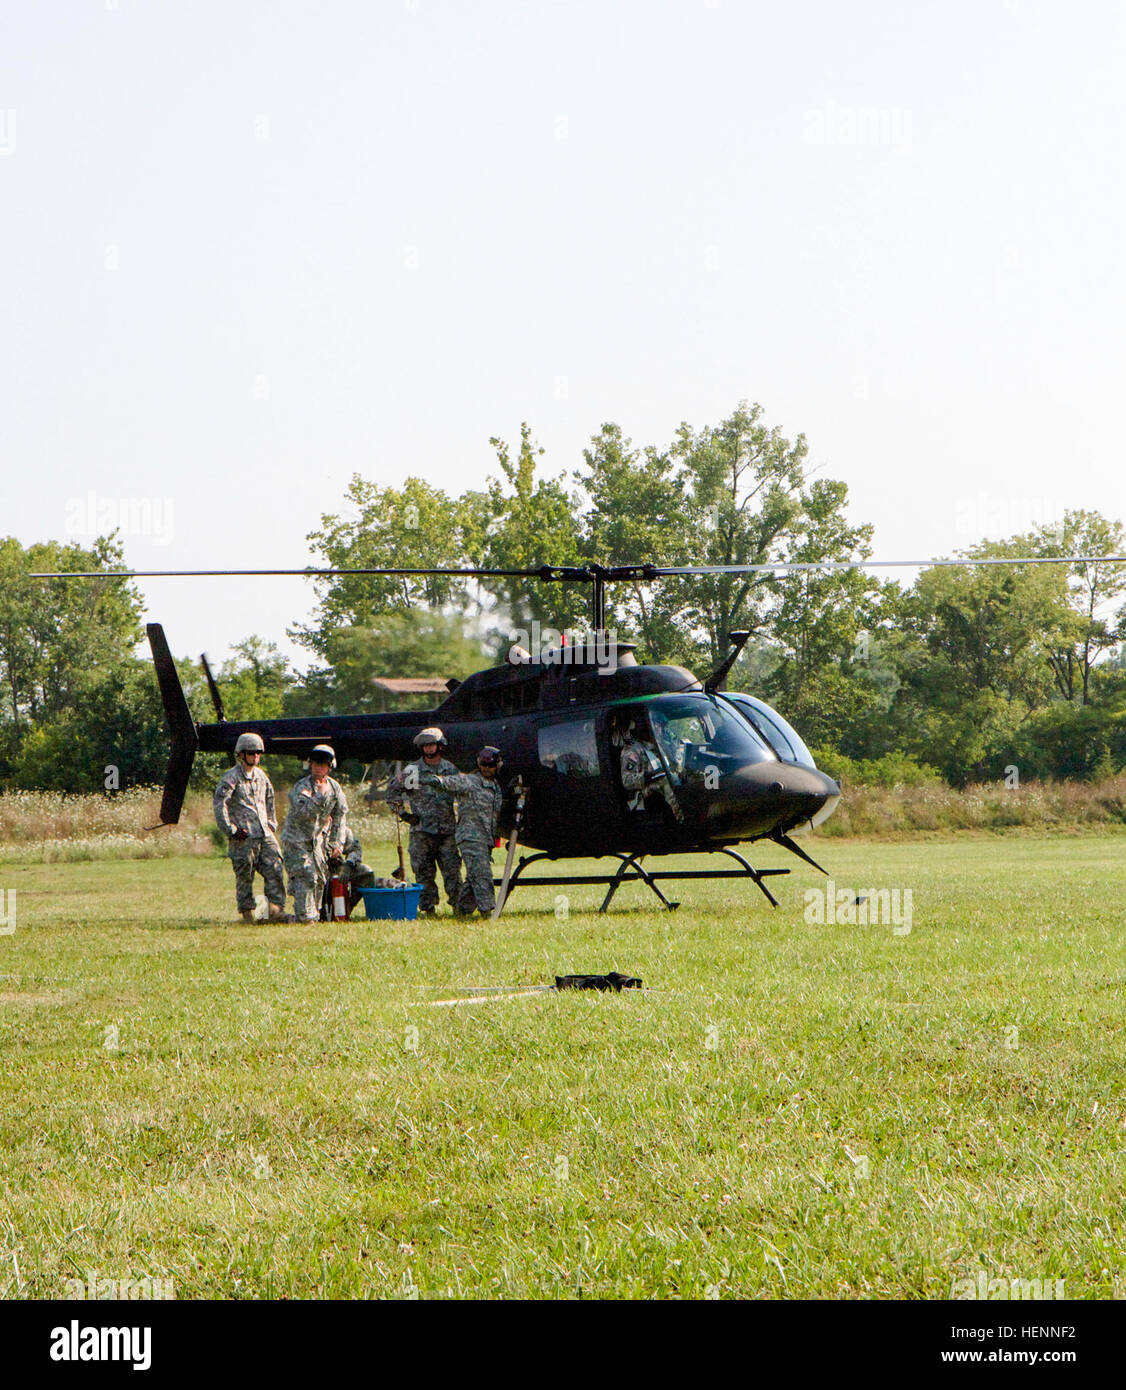 Kentucky National Guardsmen assigned to the 1204th Aviation Support Battalion, re-fuel a Blackhawk helicopter, Aug. 1, during the Vibrant Response 14 exercise at Forward Operating Base Nighthawk, Camp Atterbury, Ind. Vibrant Response is a U.S. Northern Command-sponsored field training exercise for chemical, biological, radiological, nuclear and high-yield explosive consequence management forces designed to improve their ability to respond to catastrophic incidents. (U.S. Army photo by Sgt. Dani Salvatore, 27th Public Affairs Detachment) 1204th Aviation Support Battalion 140801-A-HD862-010 Stock Photo